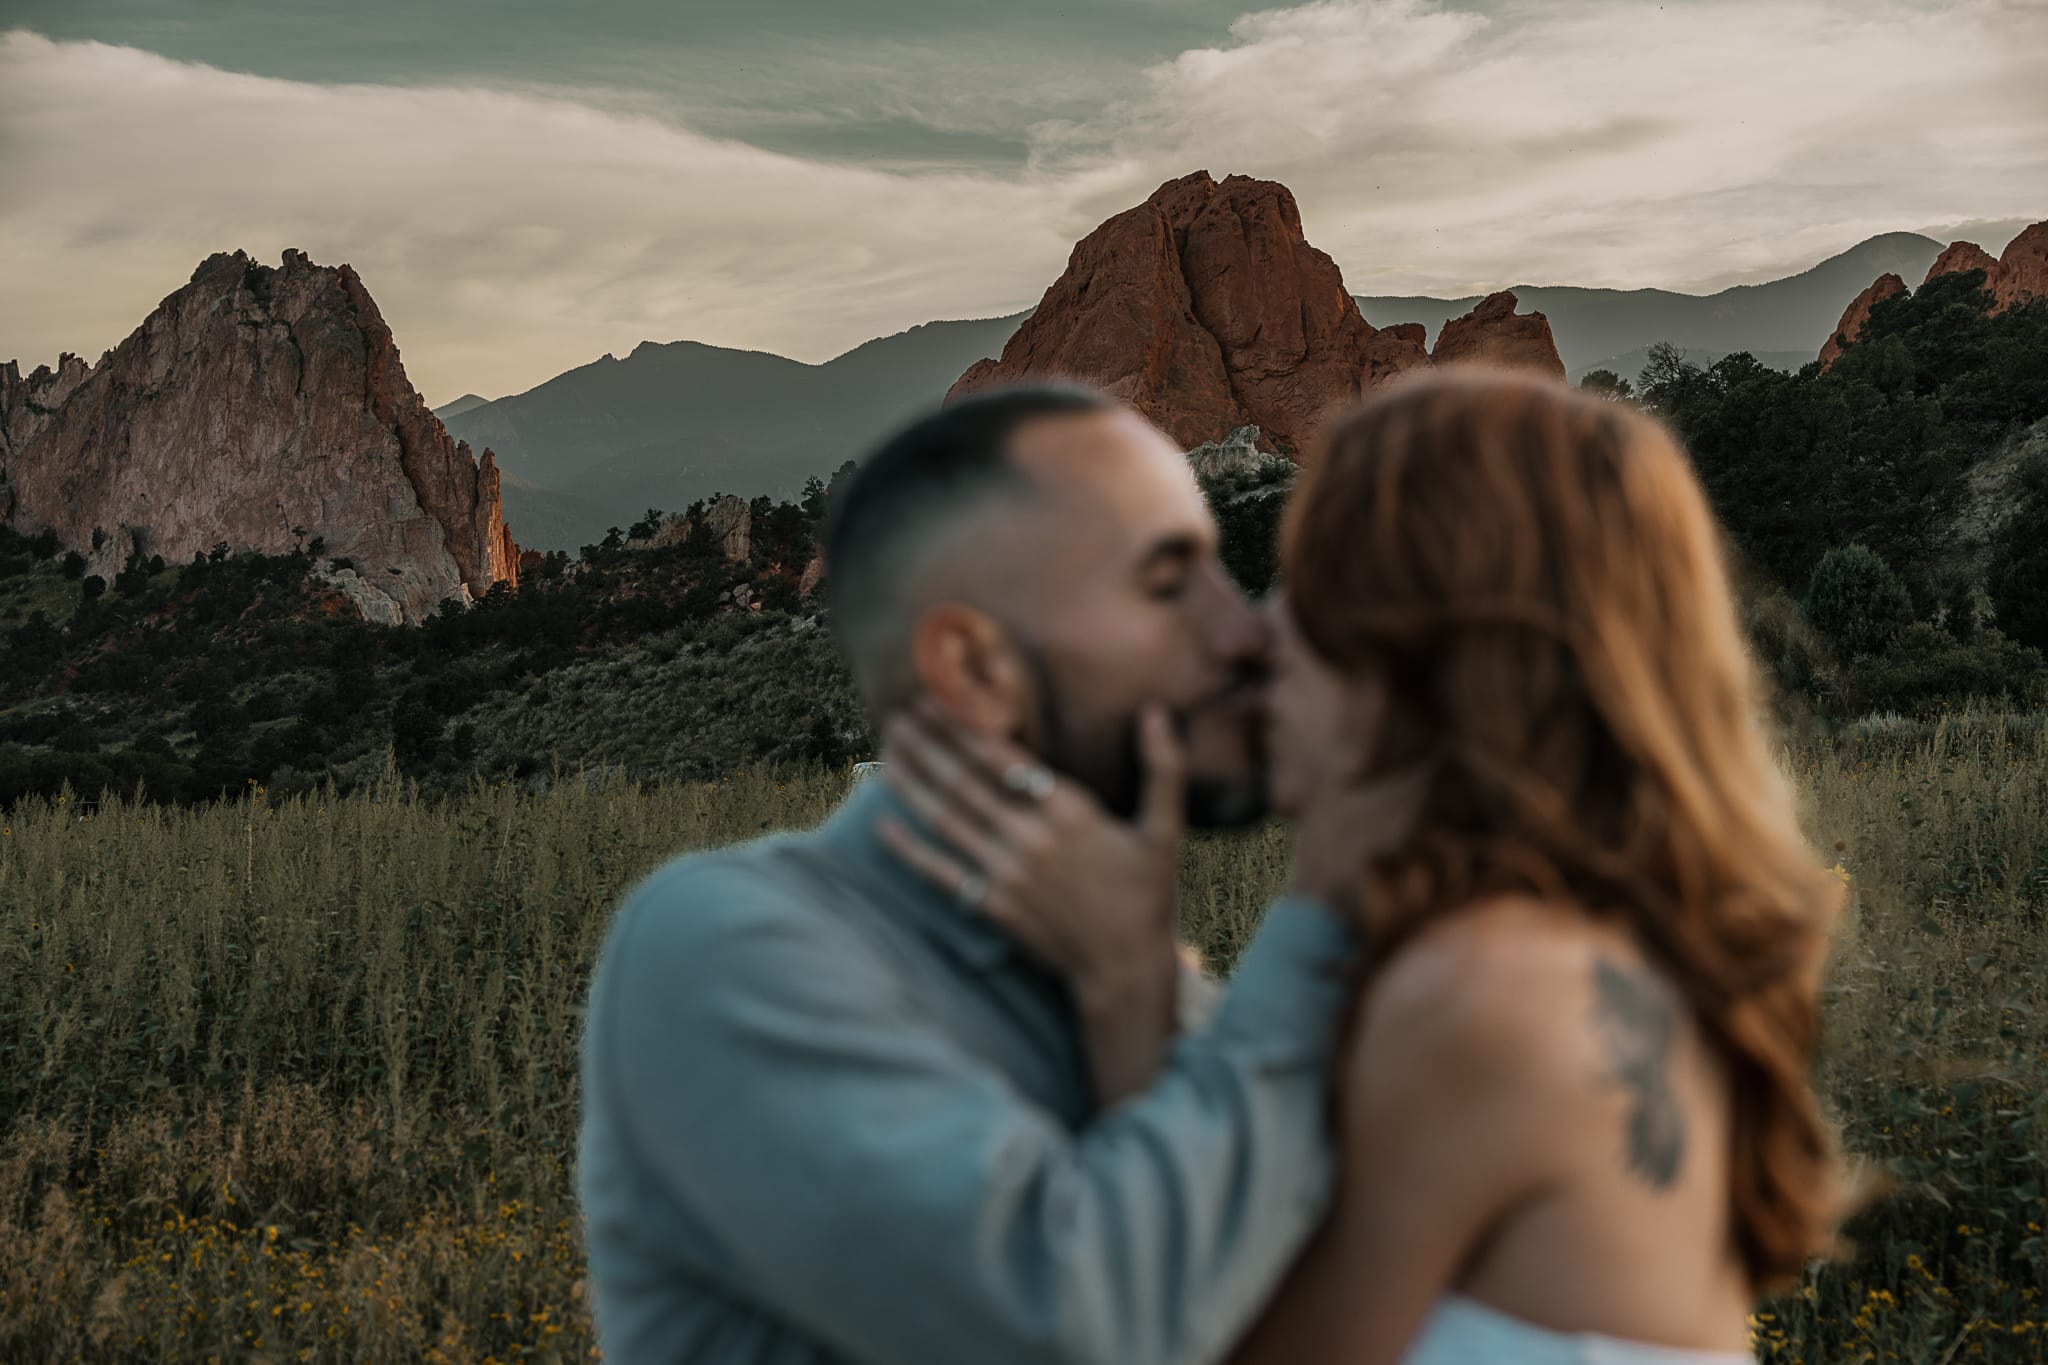 Couple kisses in Garden of the Gods, Colorado. They are blurry and the rocks are in focus behind them.